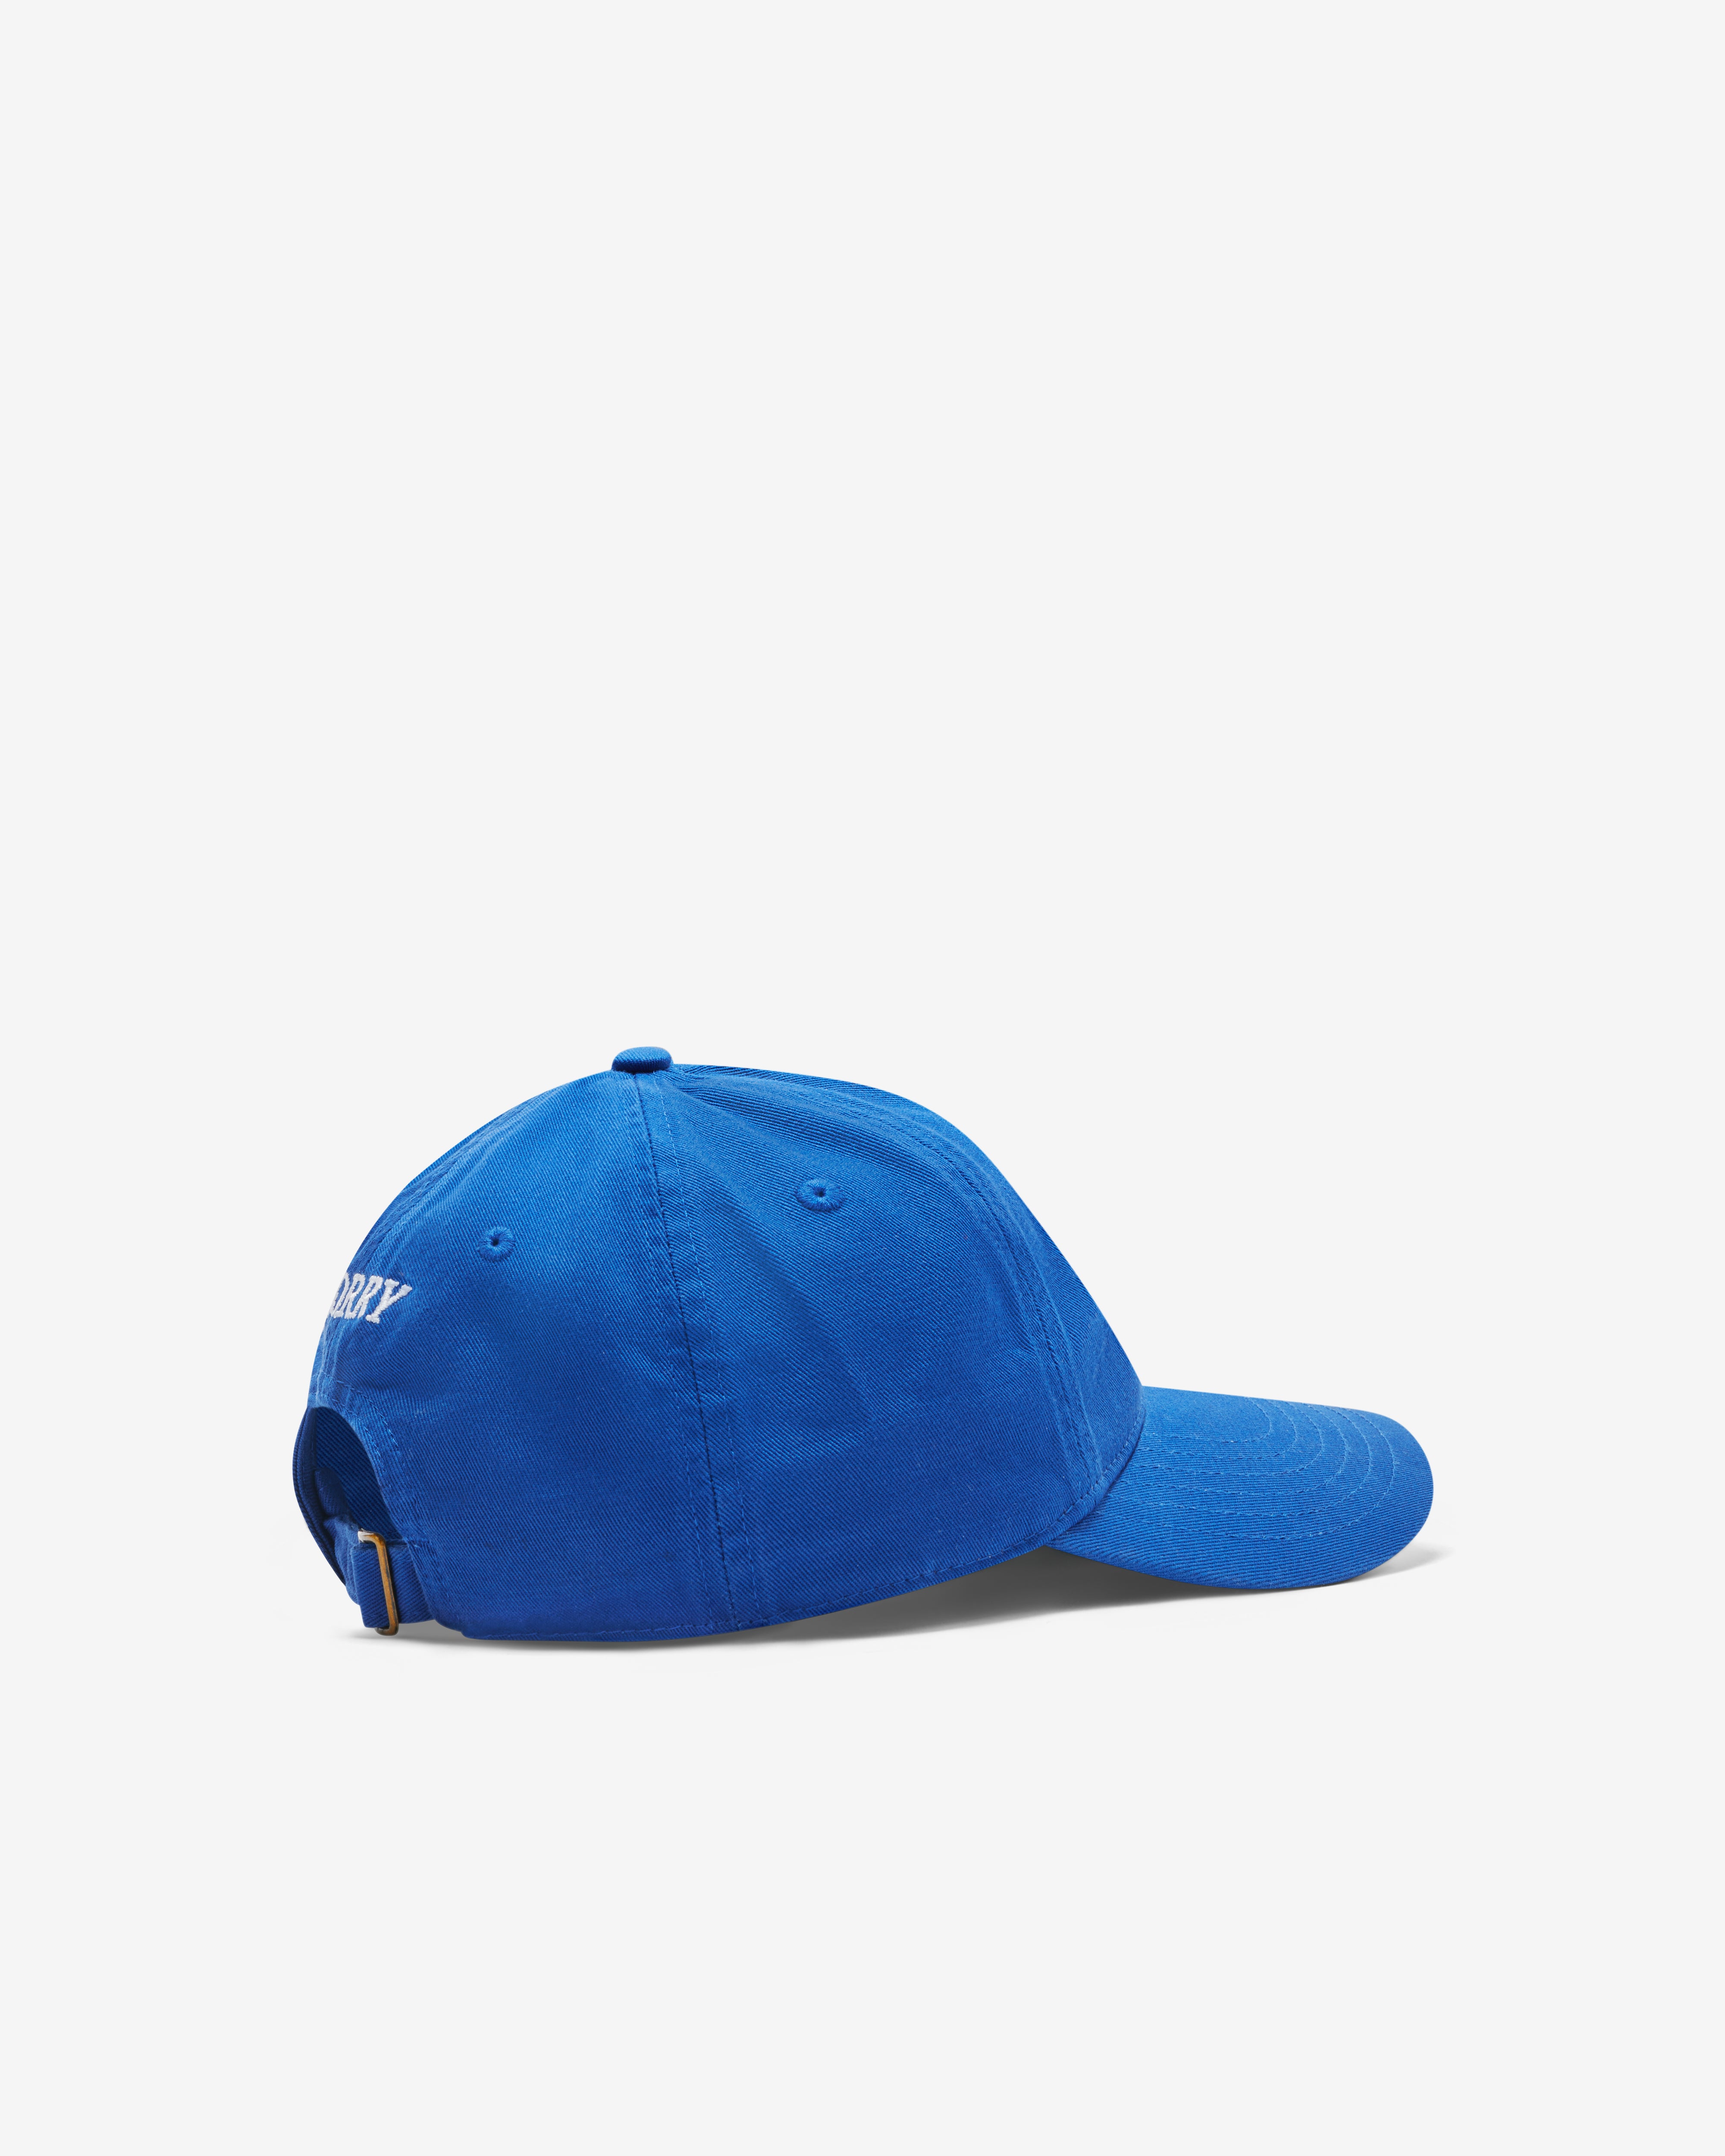 Idea Books - Sorry I Don’t Work Here Hat - (Blue)